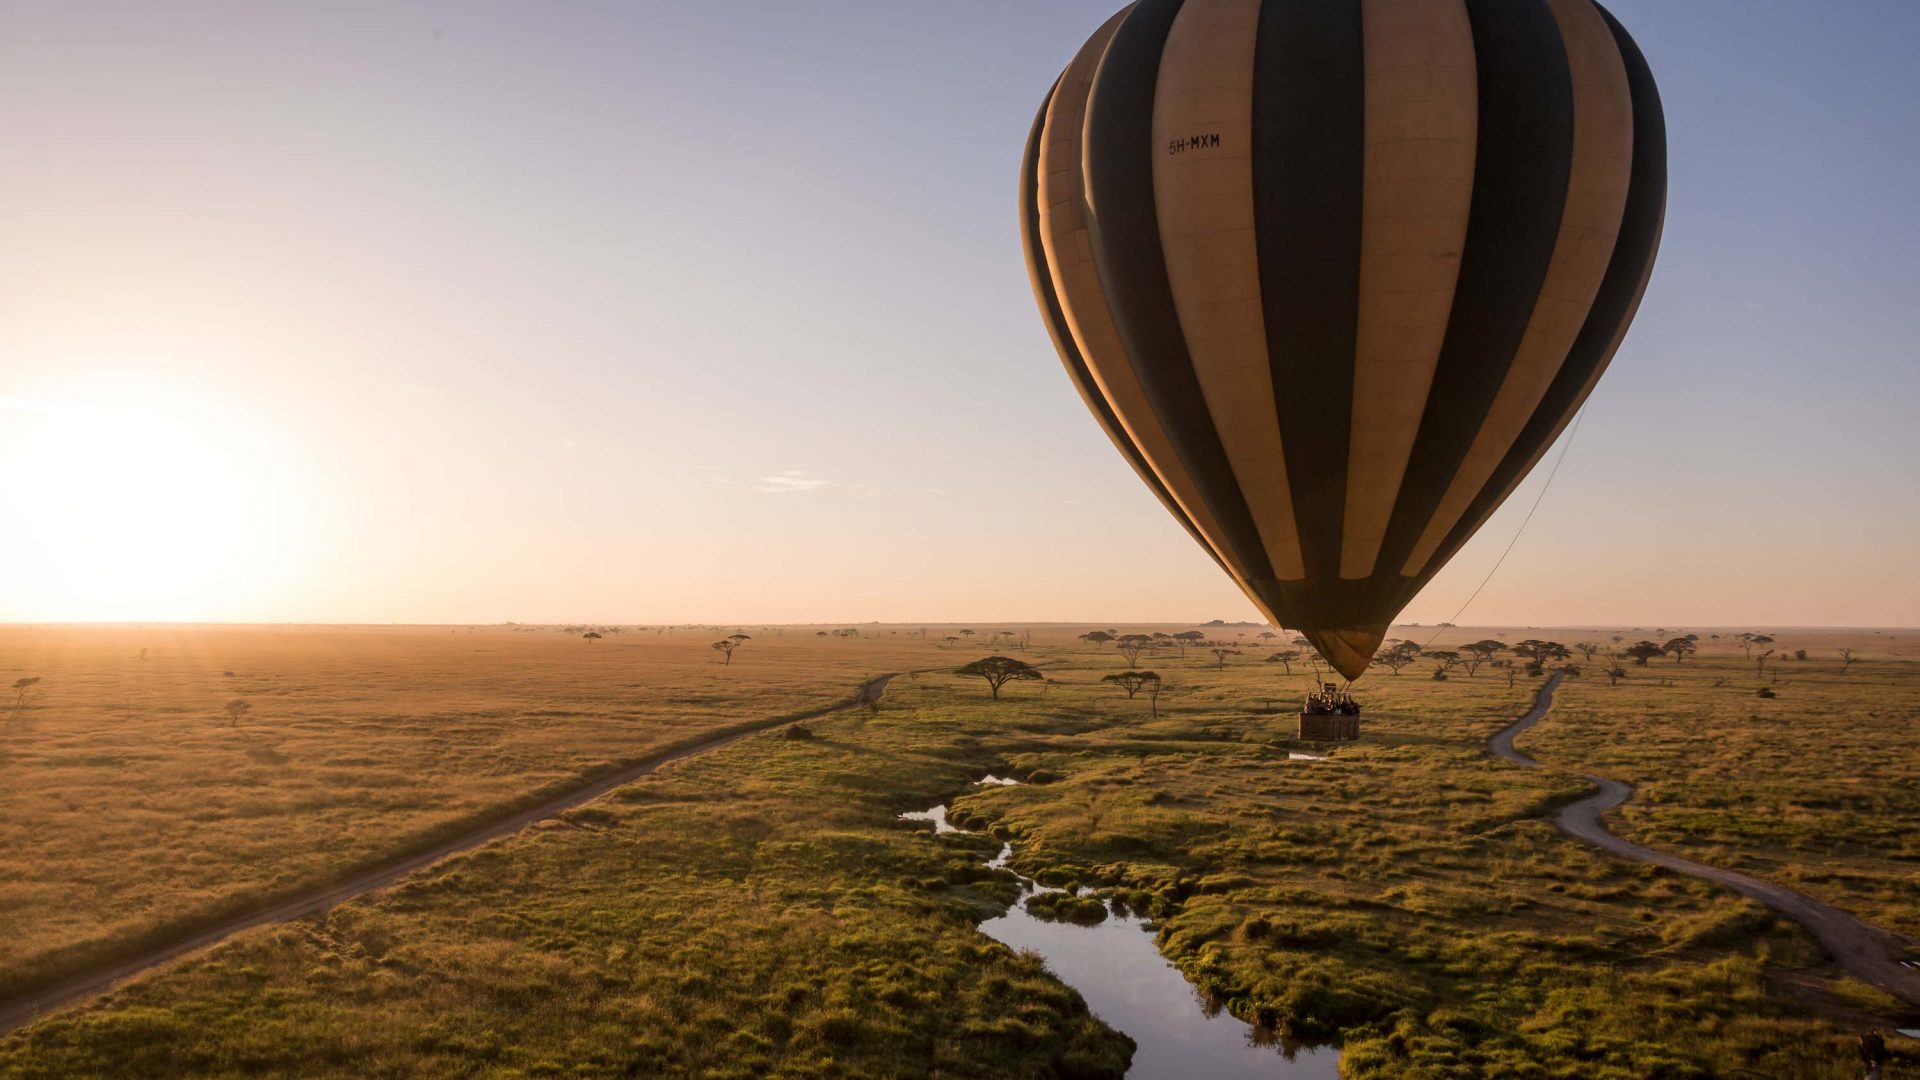 The best way to see the Serengeti? Take to the skies